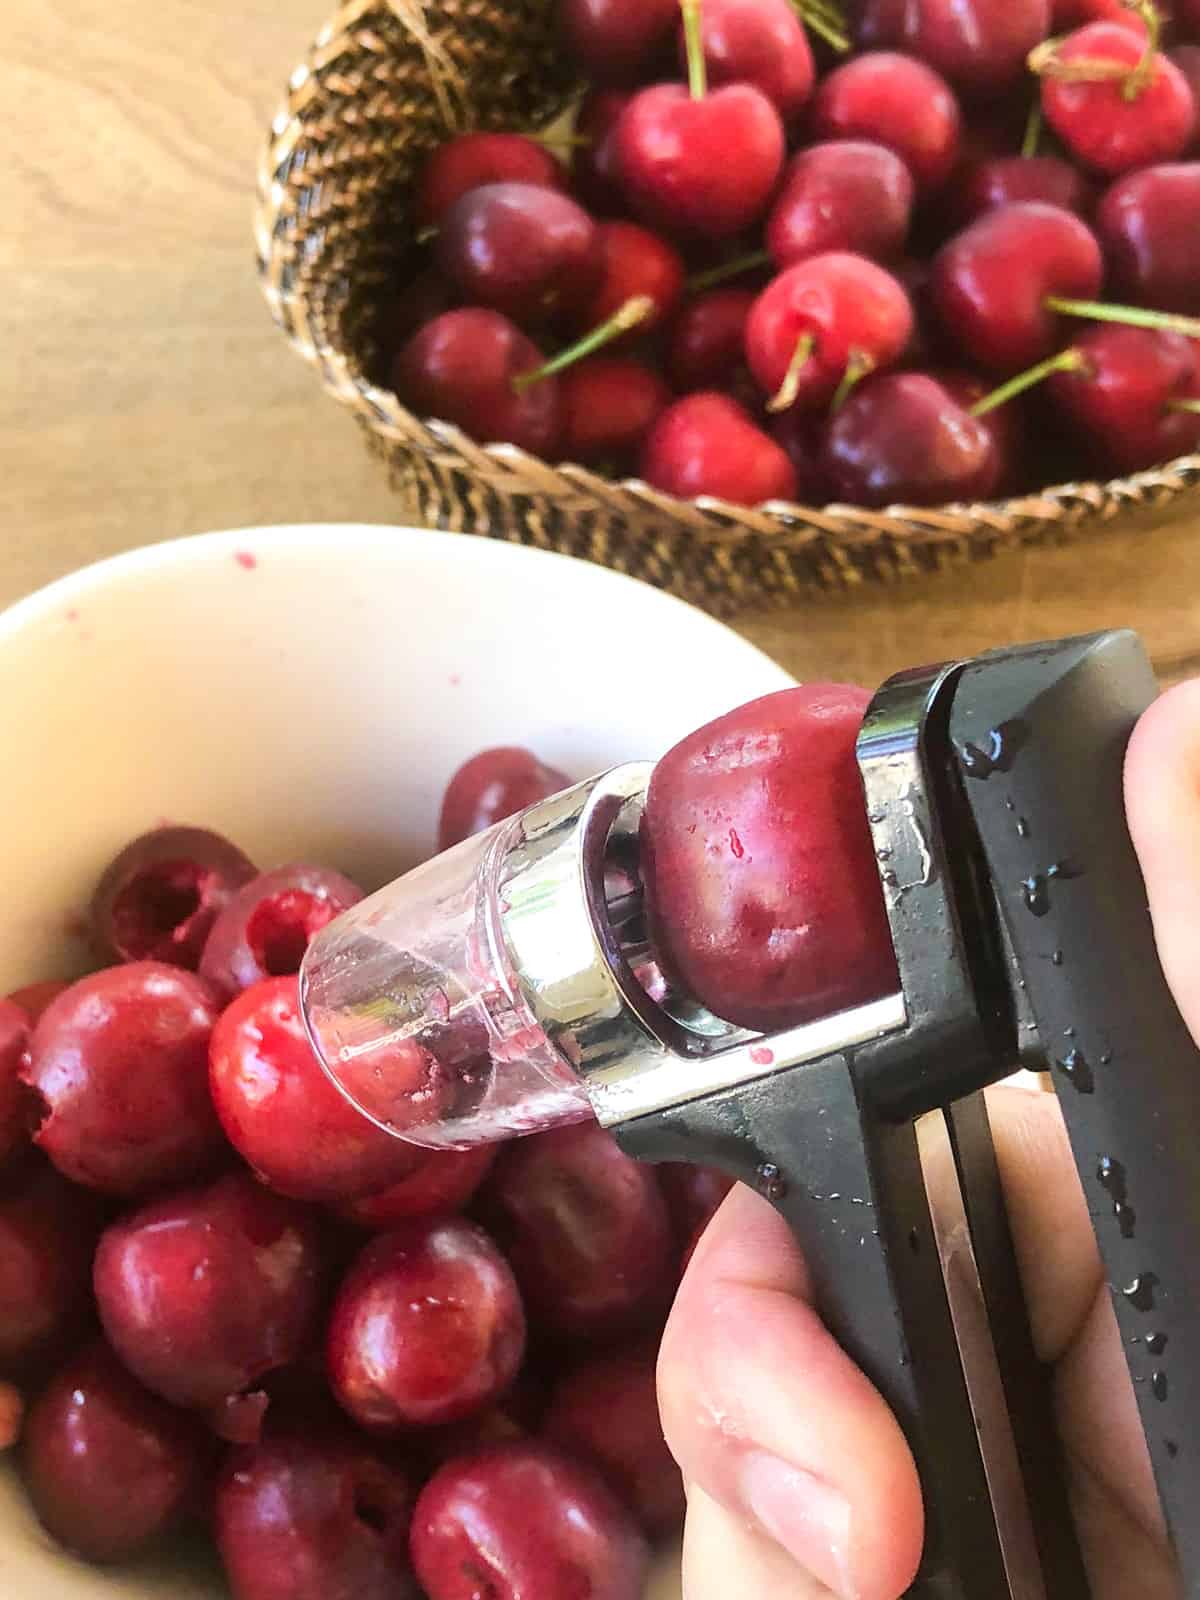 Remove the pit from the cherries.